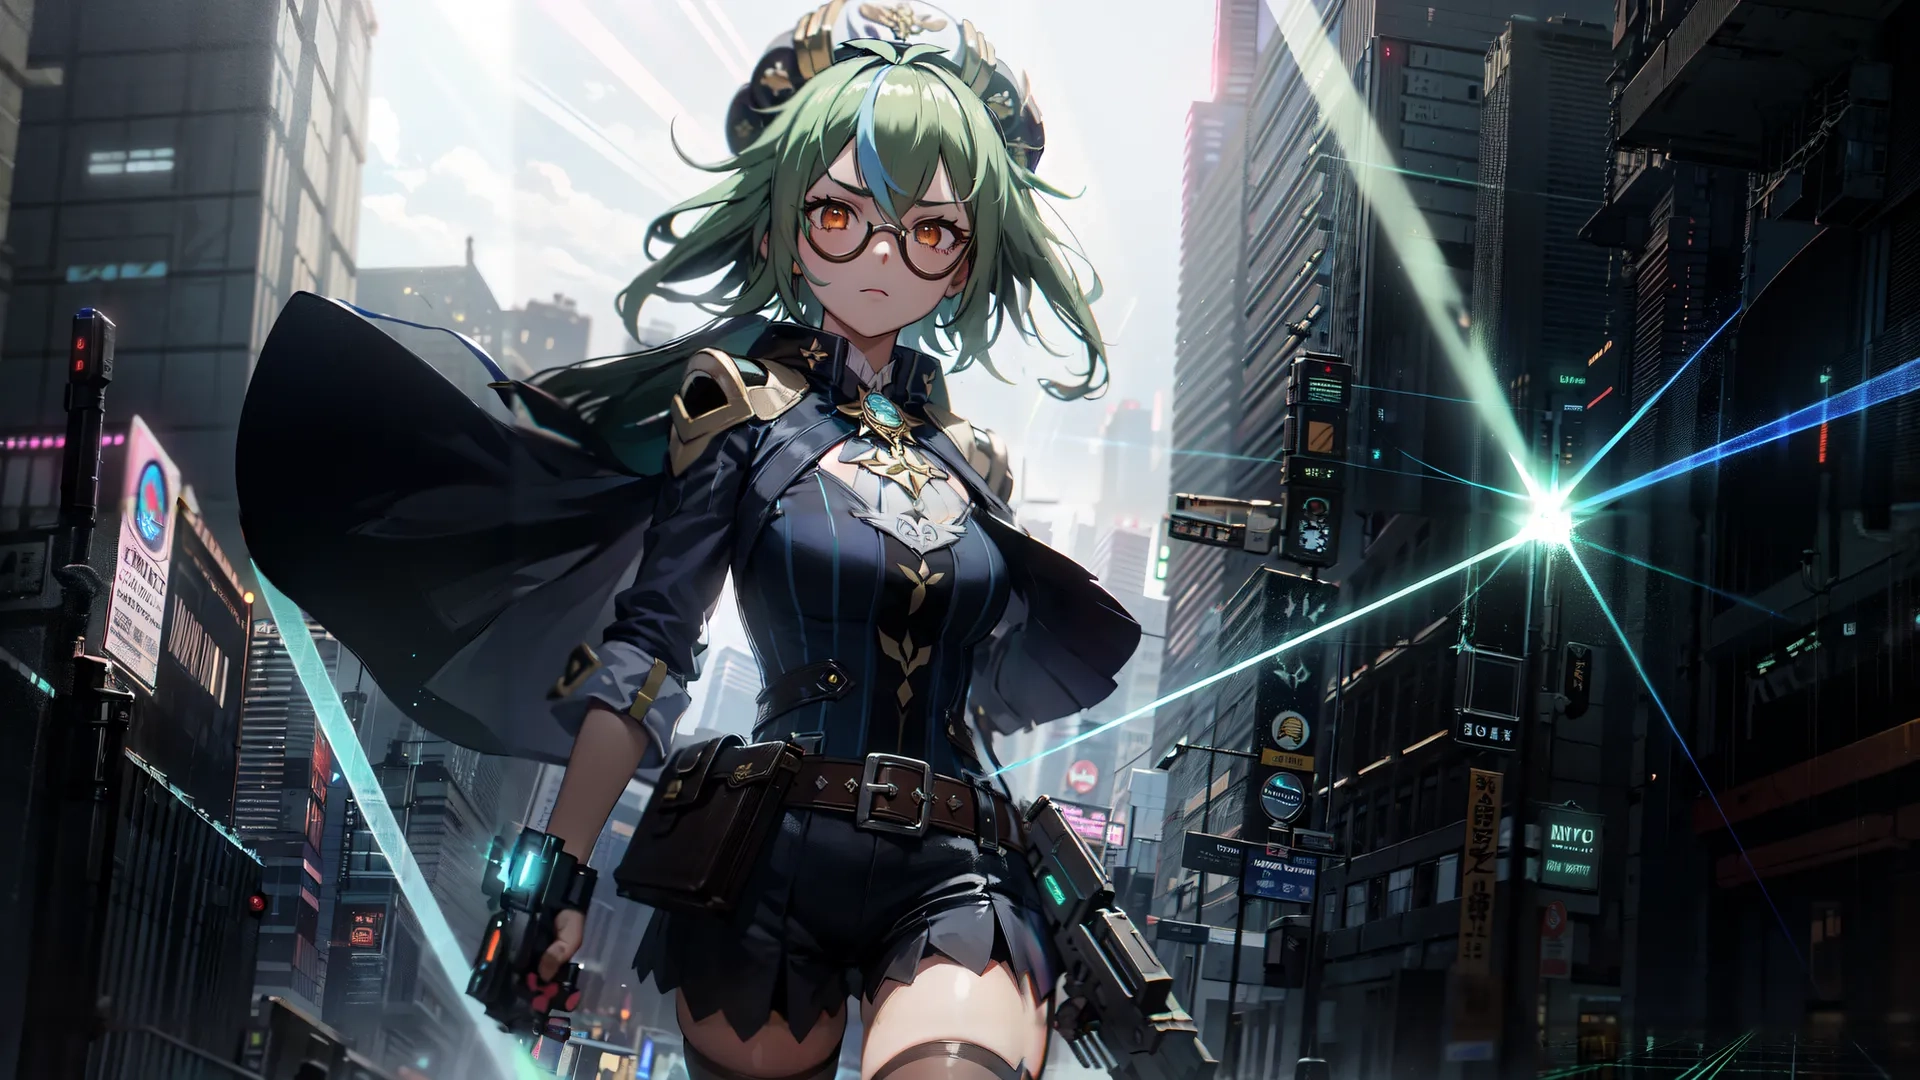 a cute blonde anime girl is standing in the streets wearing glasses on her head and holding a gun behind her back and arm in a city scene
